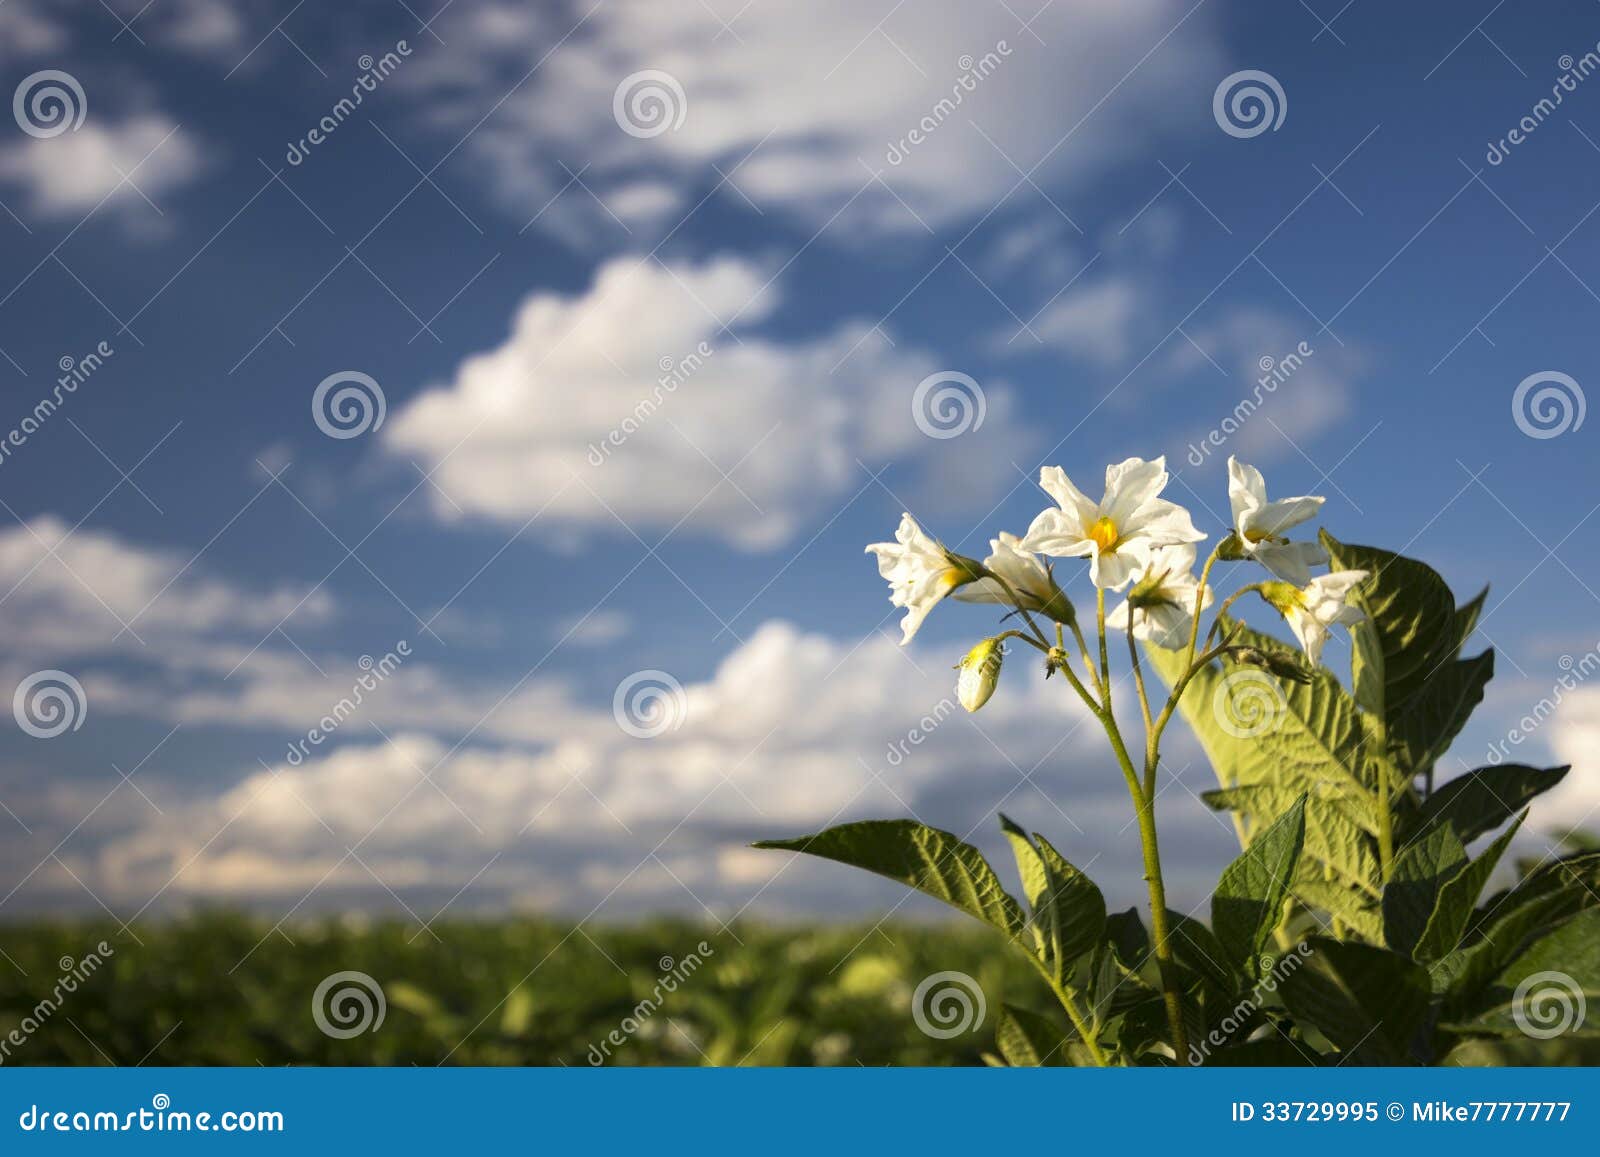 potato plant flowers on sunny day, midwest, usa